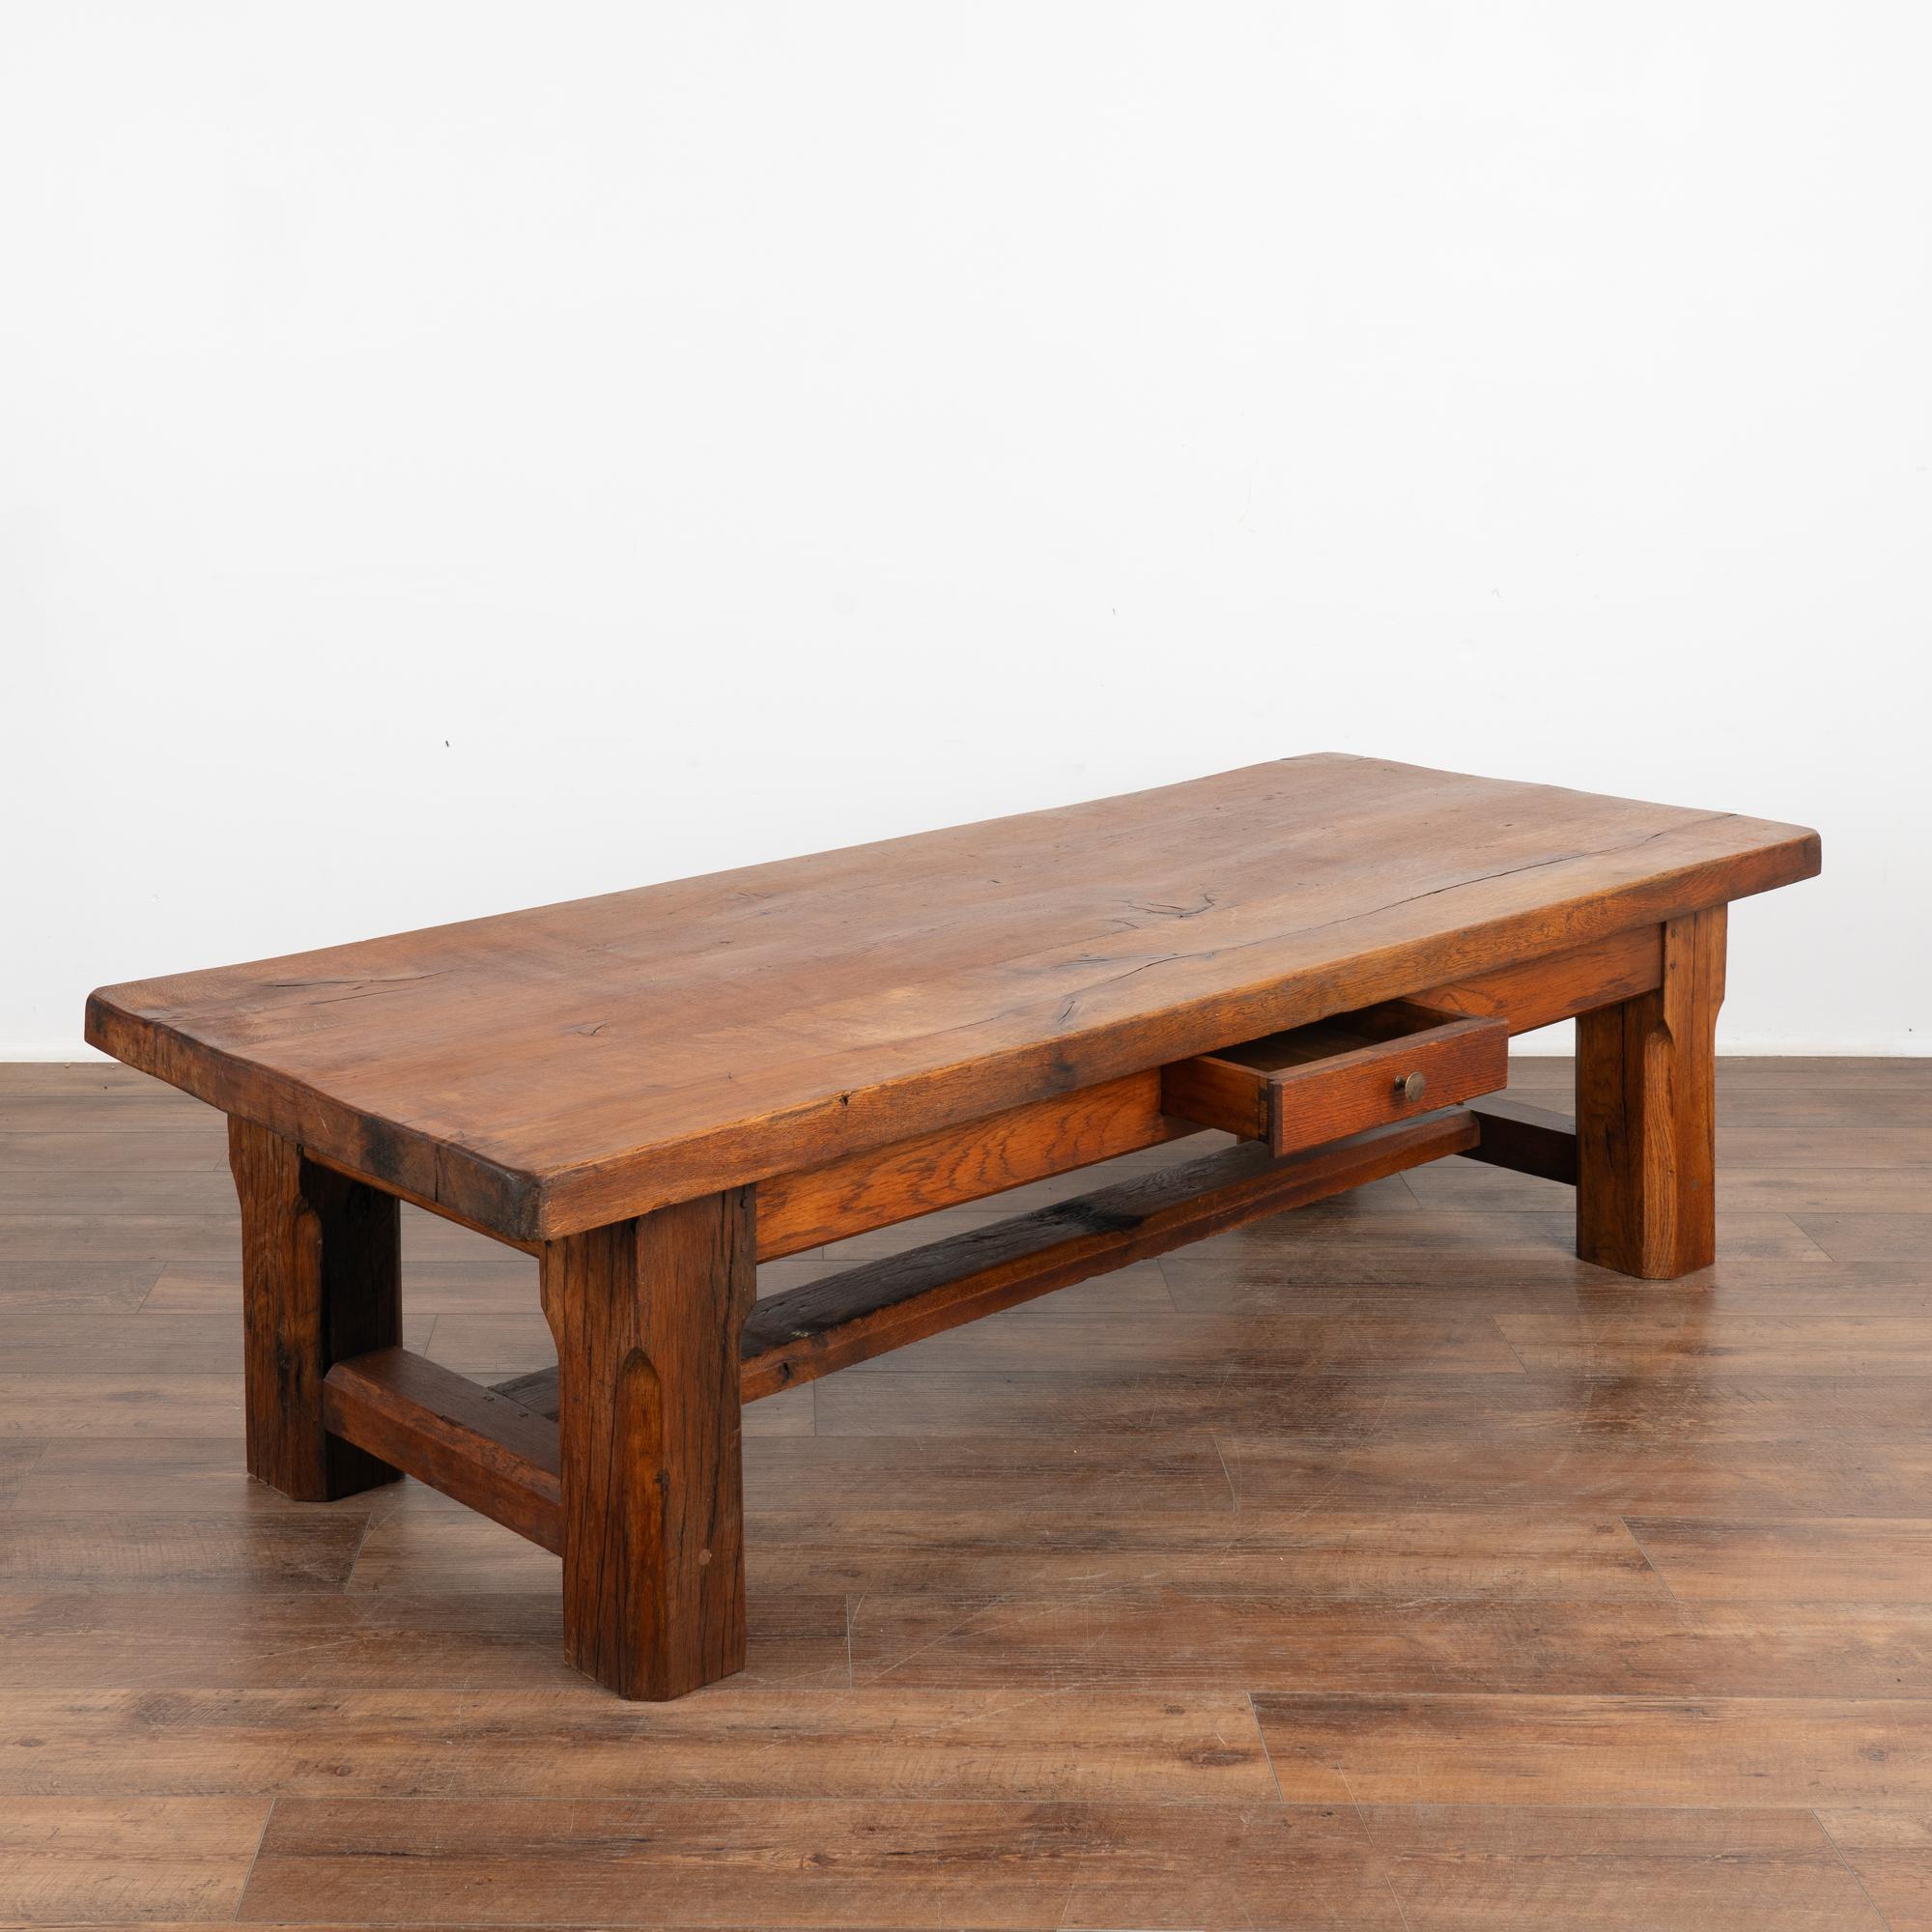 Country Large Coffee Table With Single Drawer from France, circa 1900 For Sale